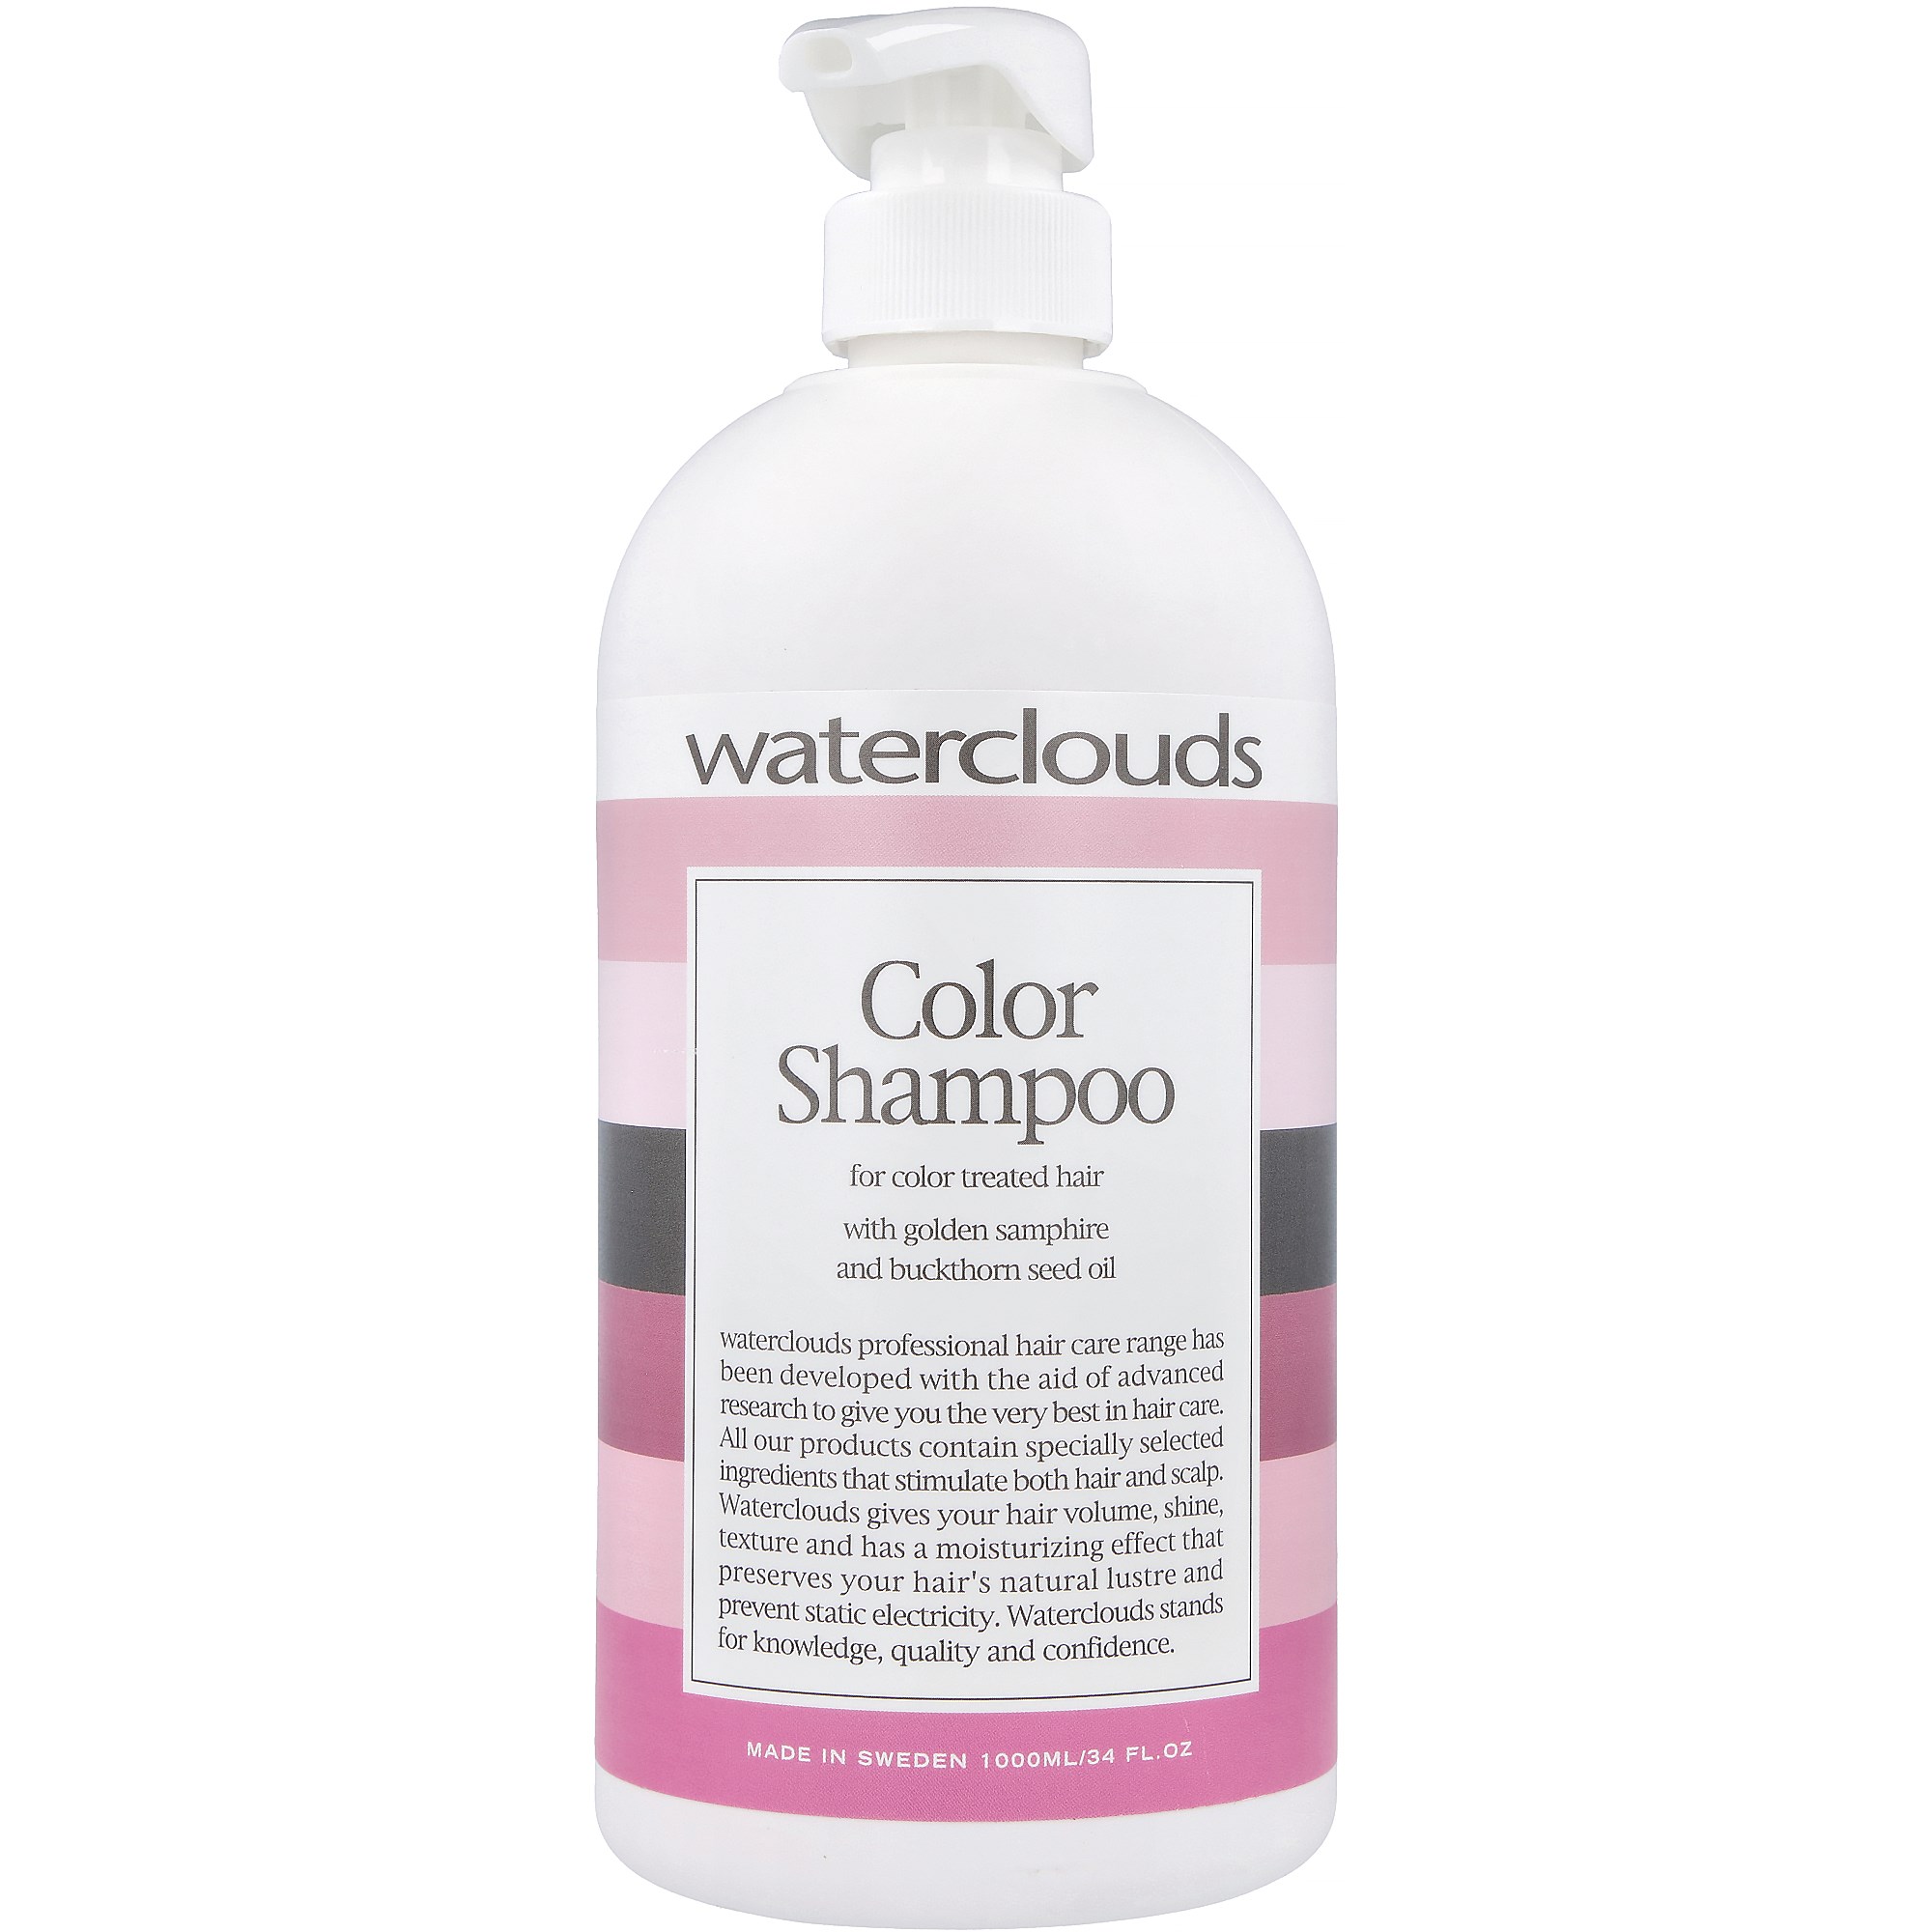 Waterclouds Color Shampoo 1000 ml